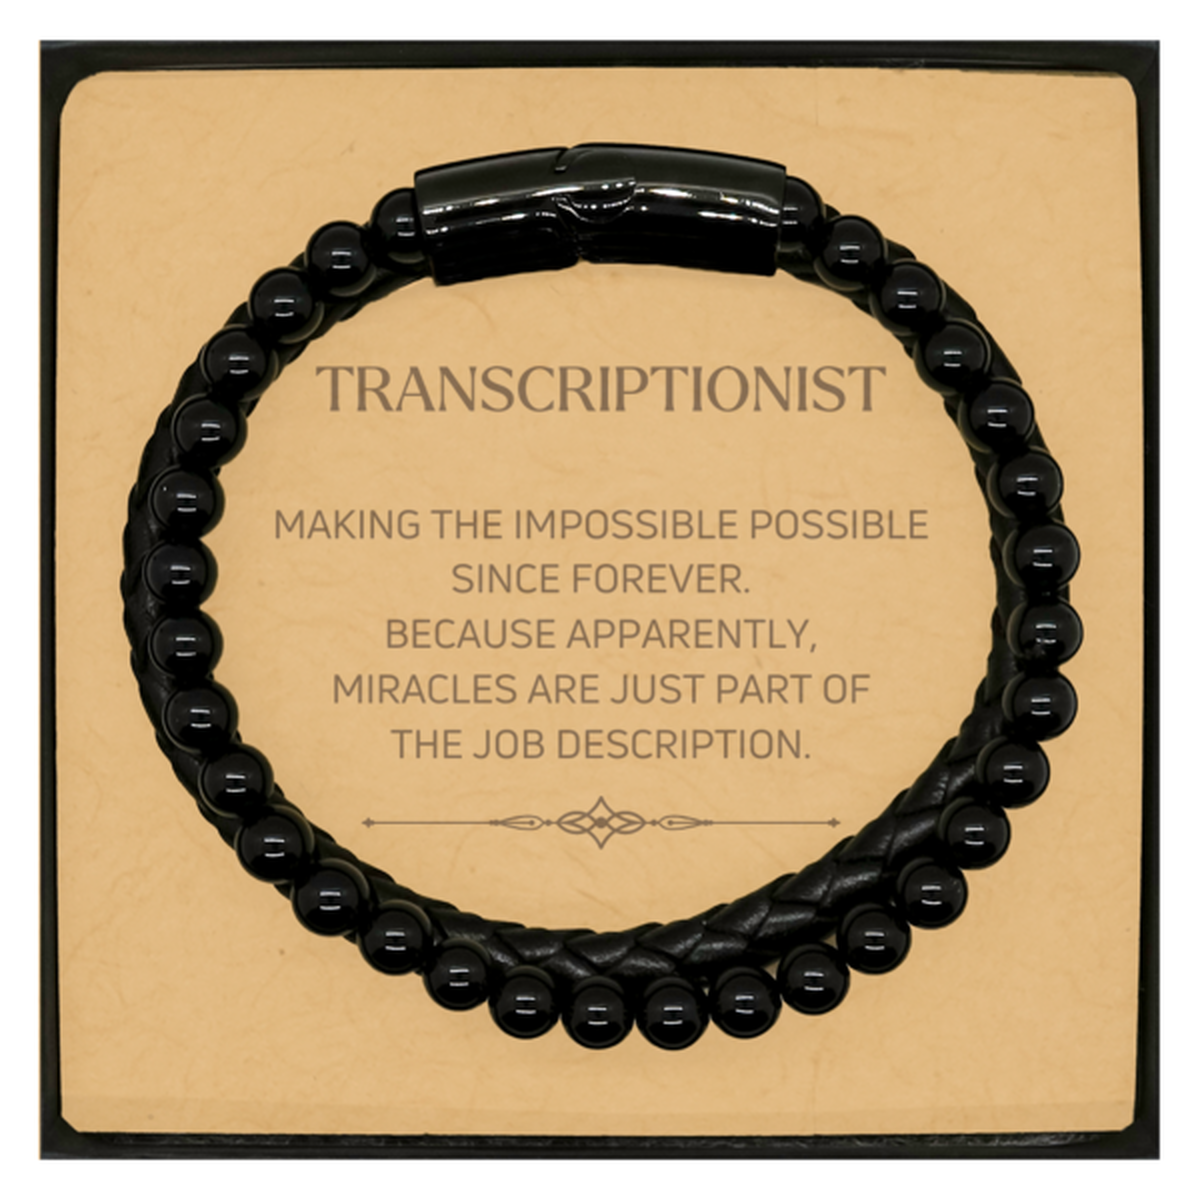 Funny Transcriptionist Gifts, Miracles are just part of the job description, Inspirational Birthday Christmas Stone Leather Bracelets For Transcriptionist, Men, Women, Coworkers, Friends, Boss